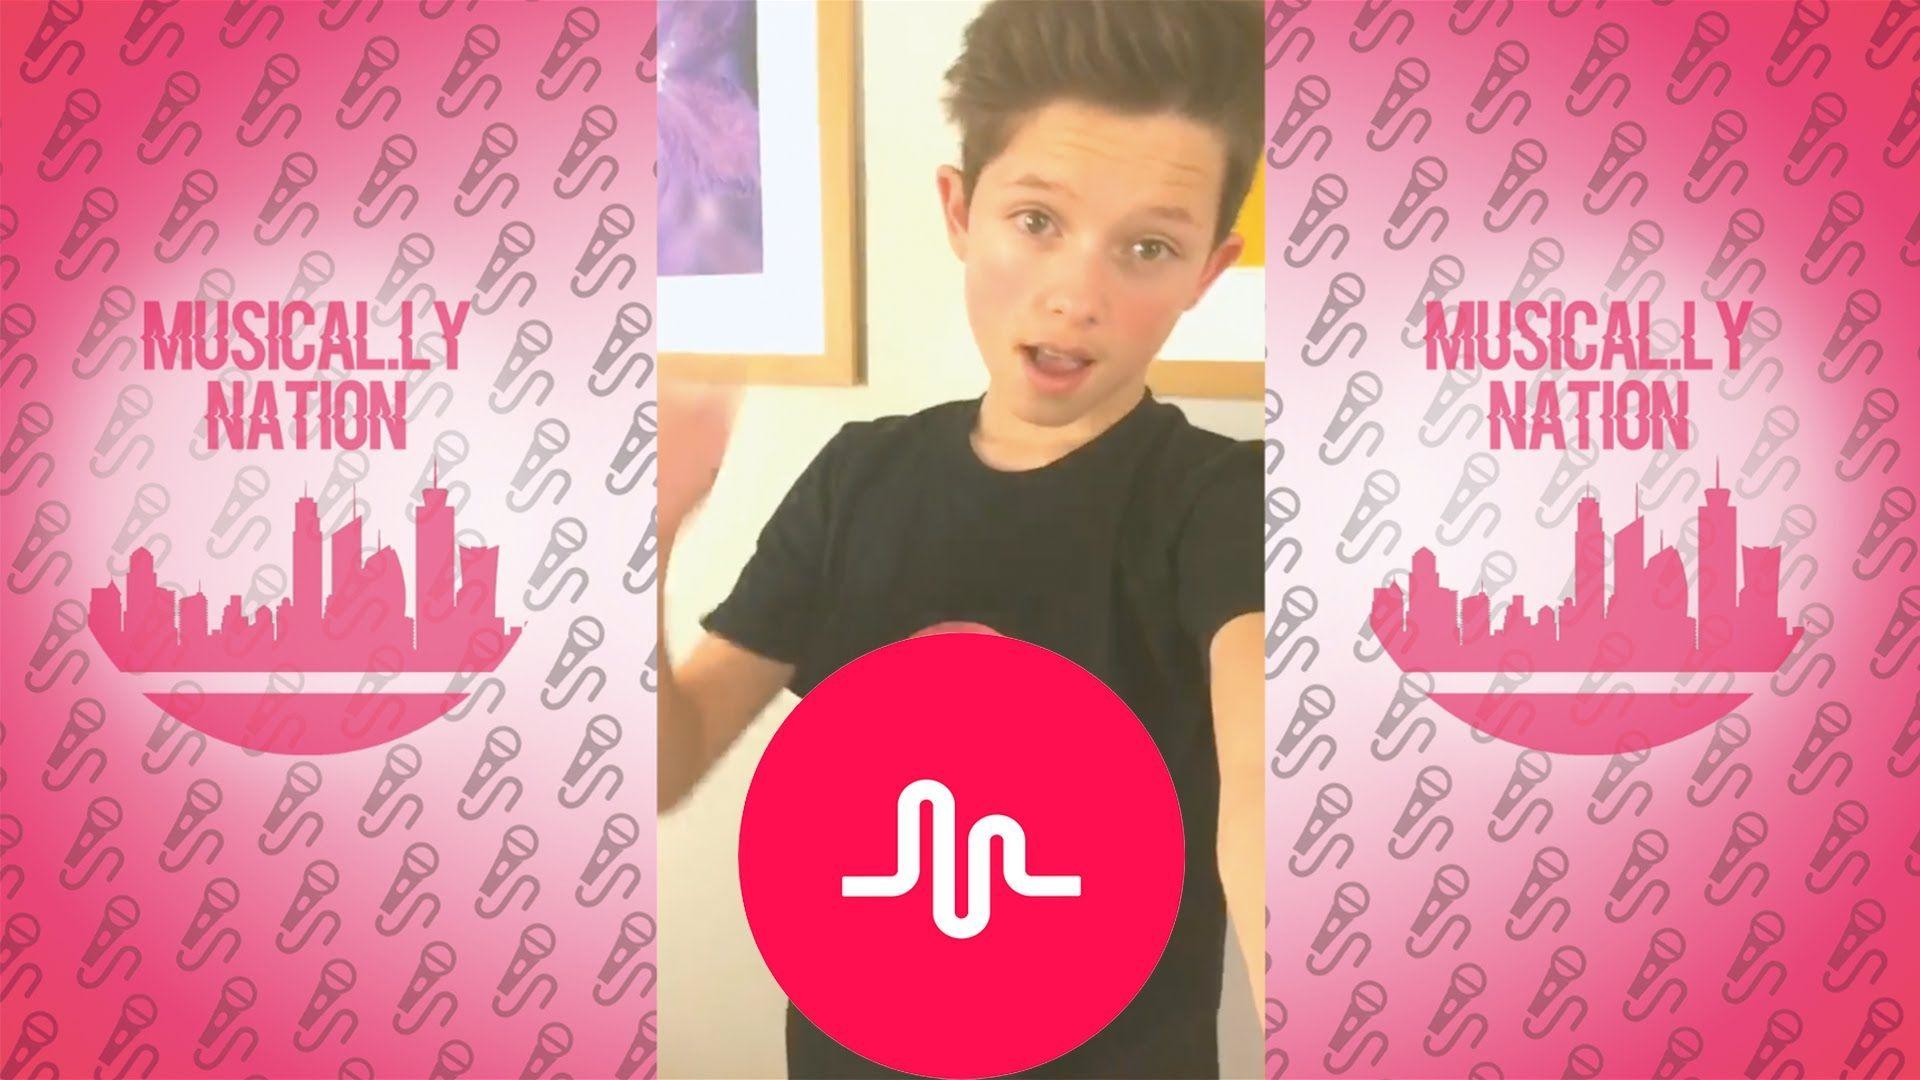 1920x1080 Best Jacob Sartorius 50+ Musical.ly Compilation 2016 - YouTube